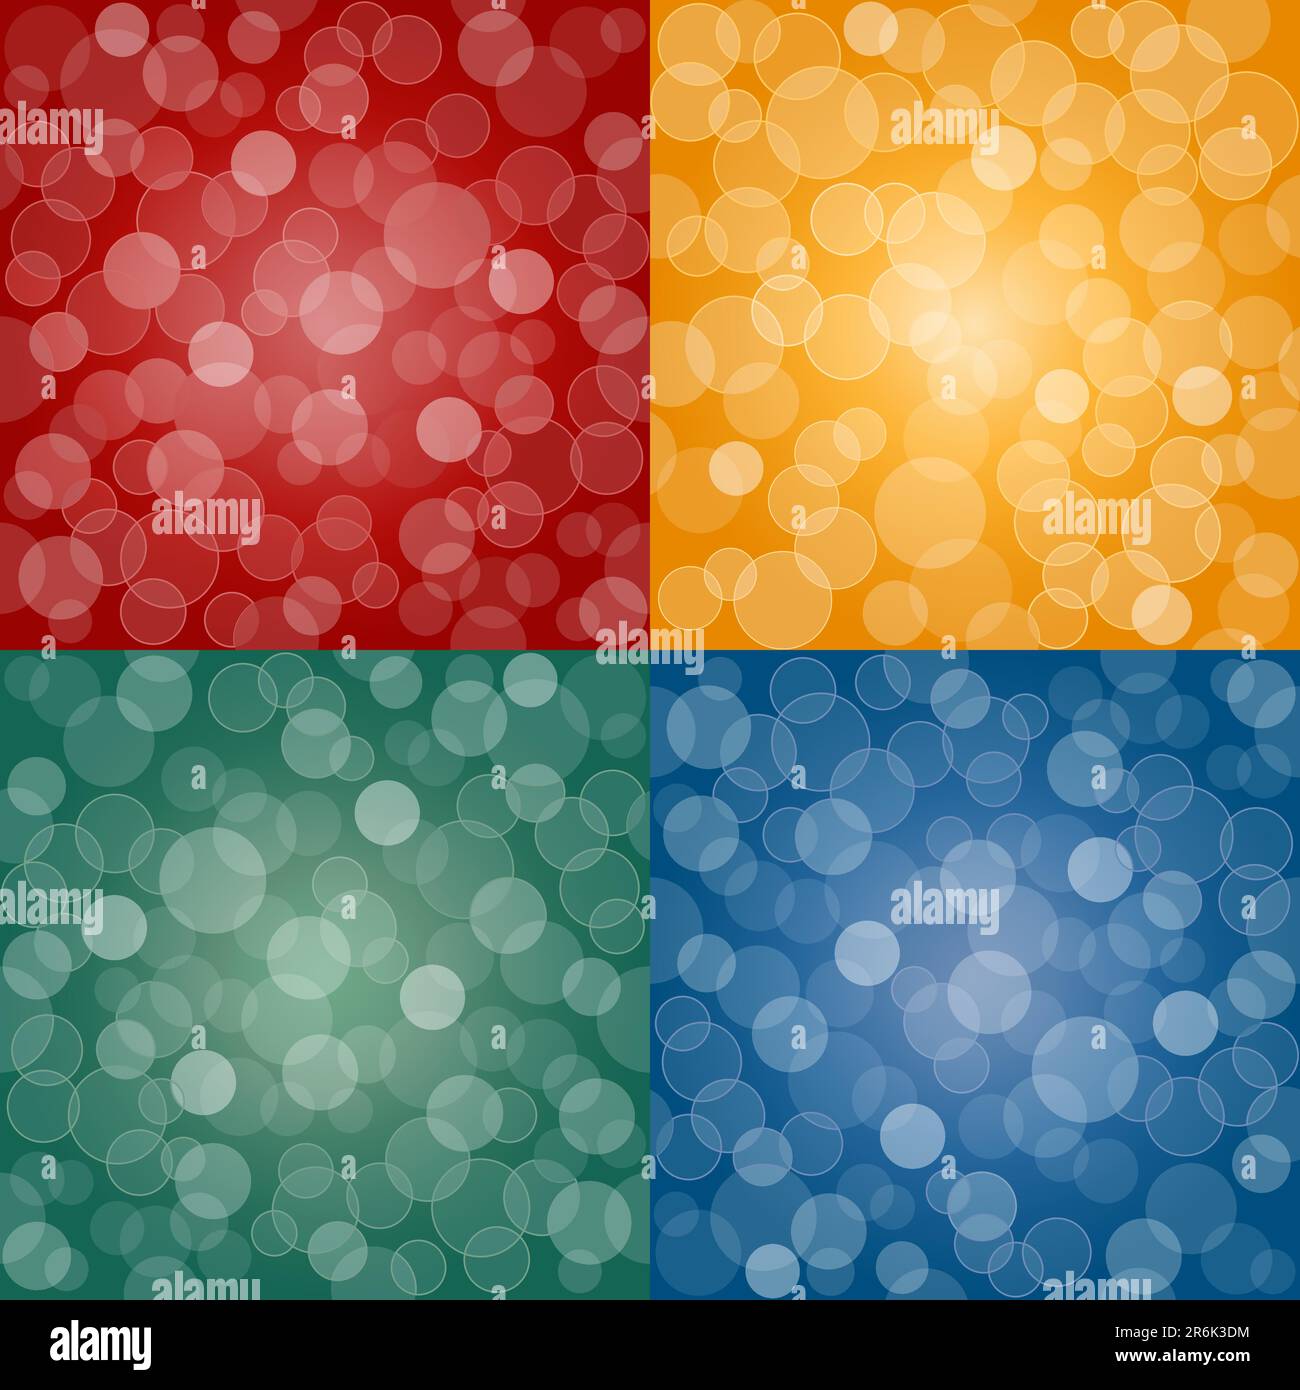 Seamless abstract backgrounds. Vector illustration. Stock Vector